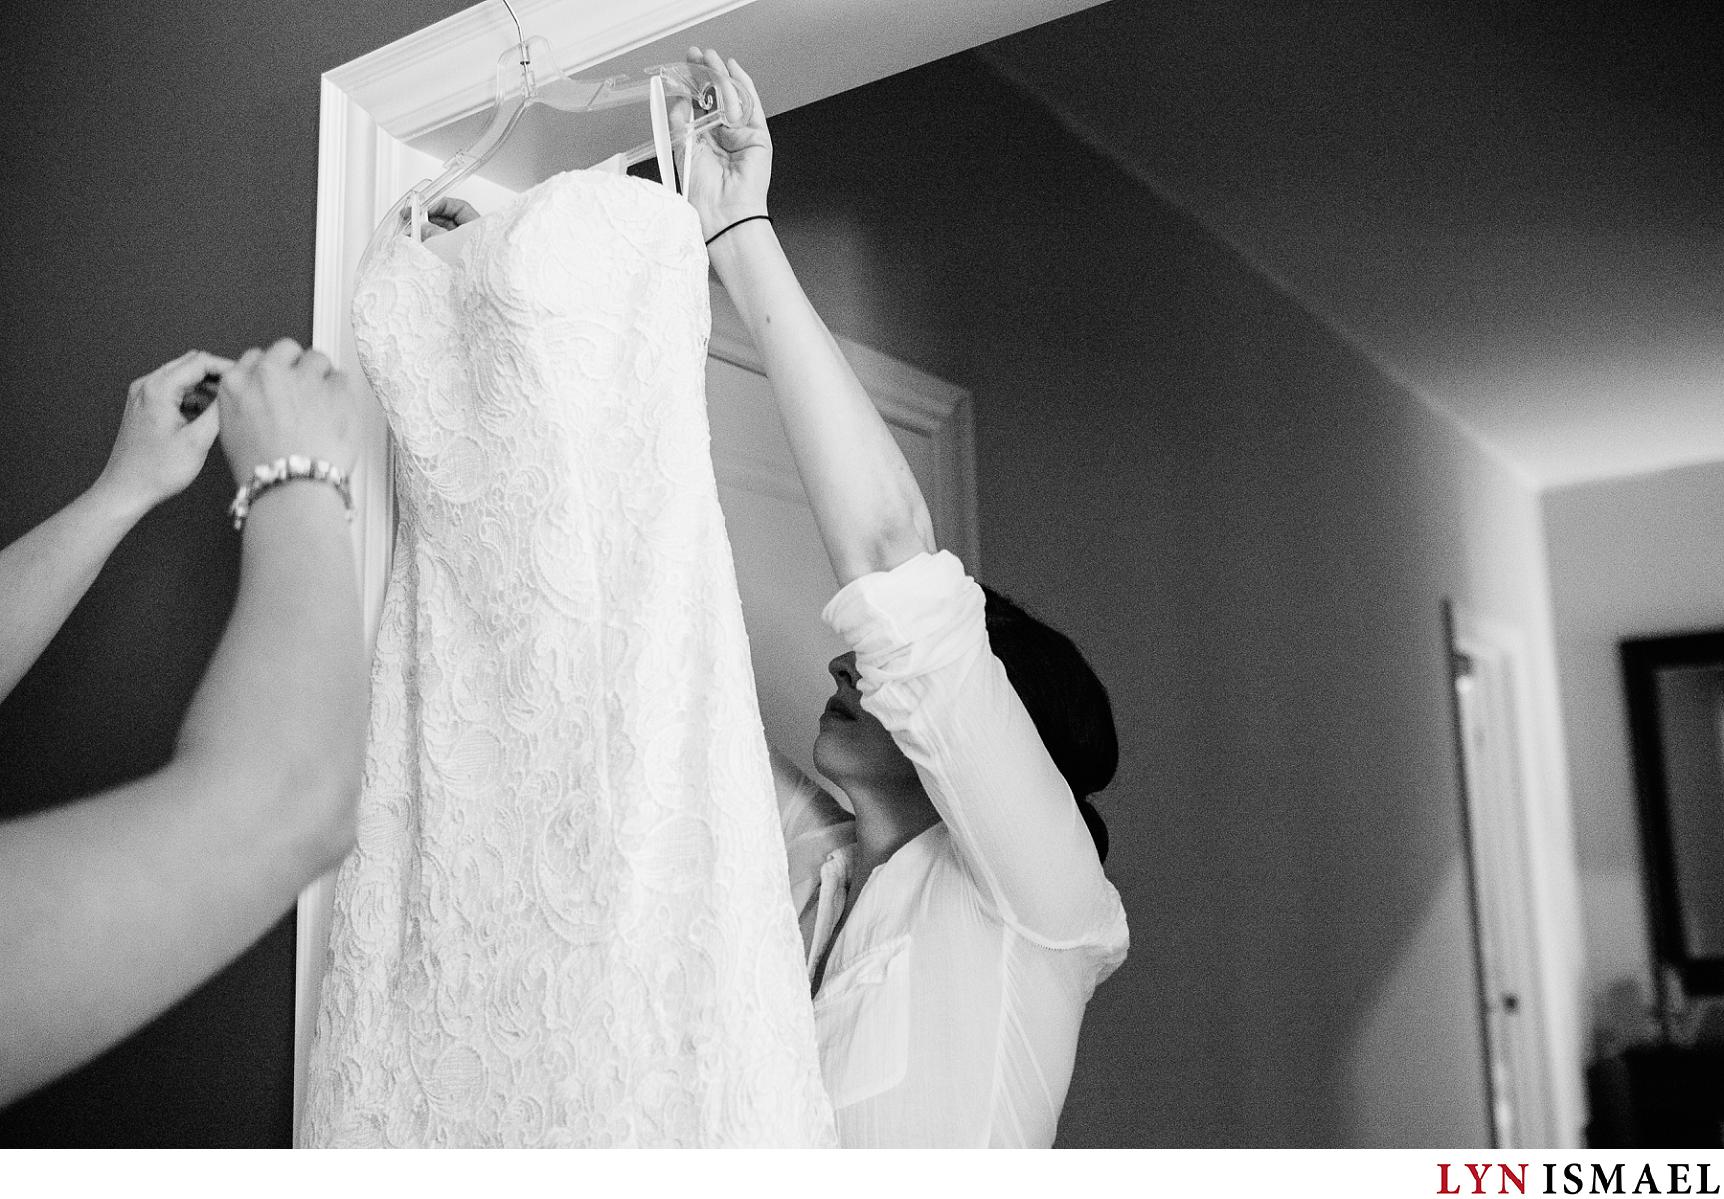 Bride reaches for her wedding gown hanging.